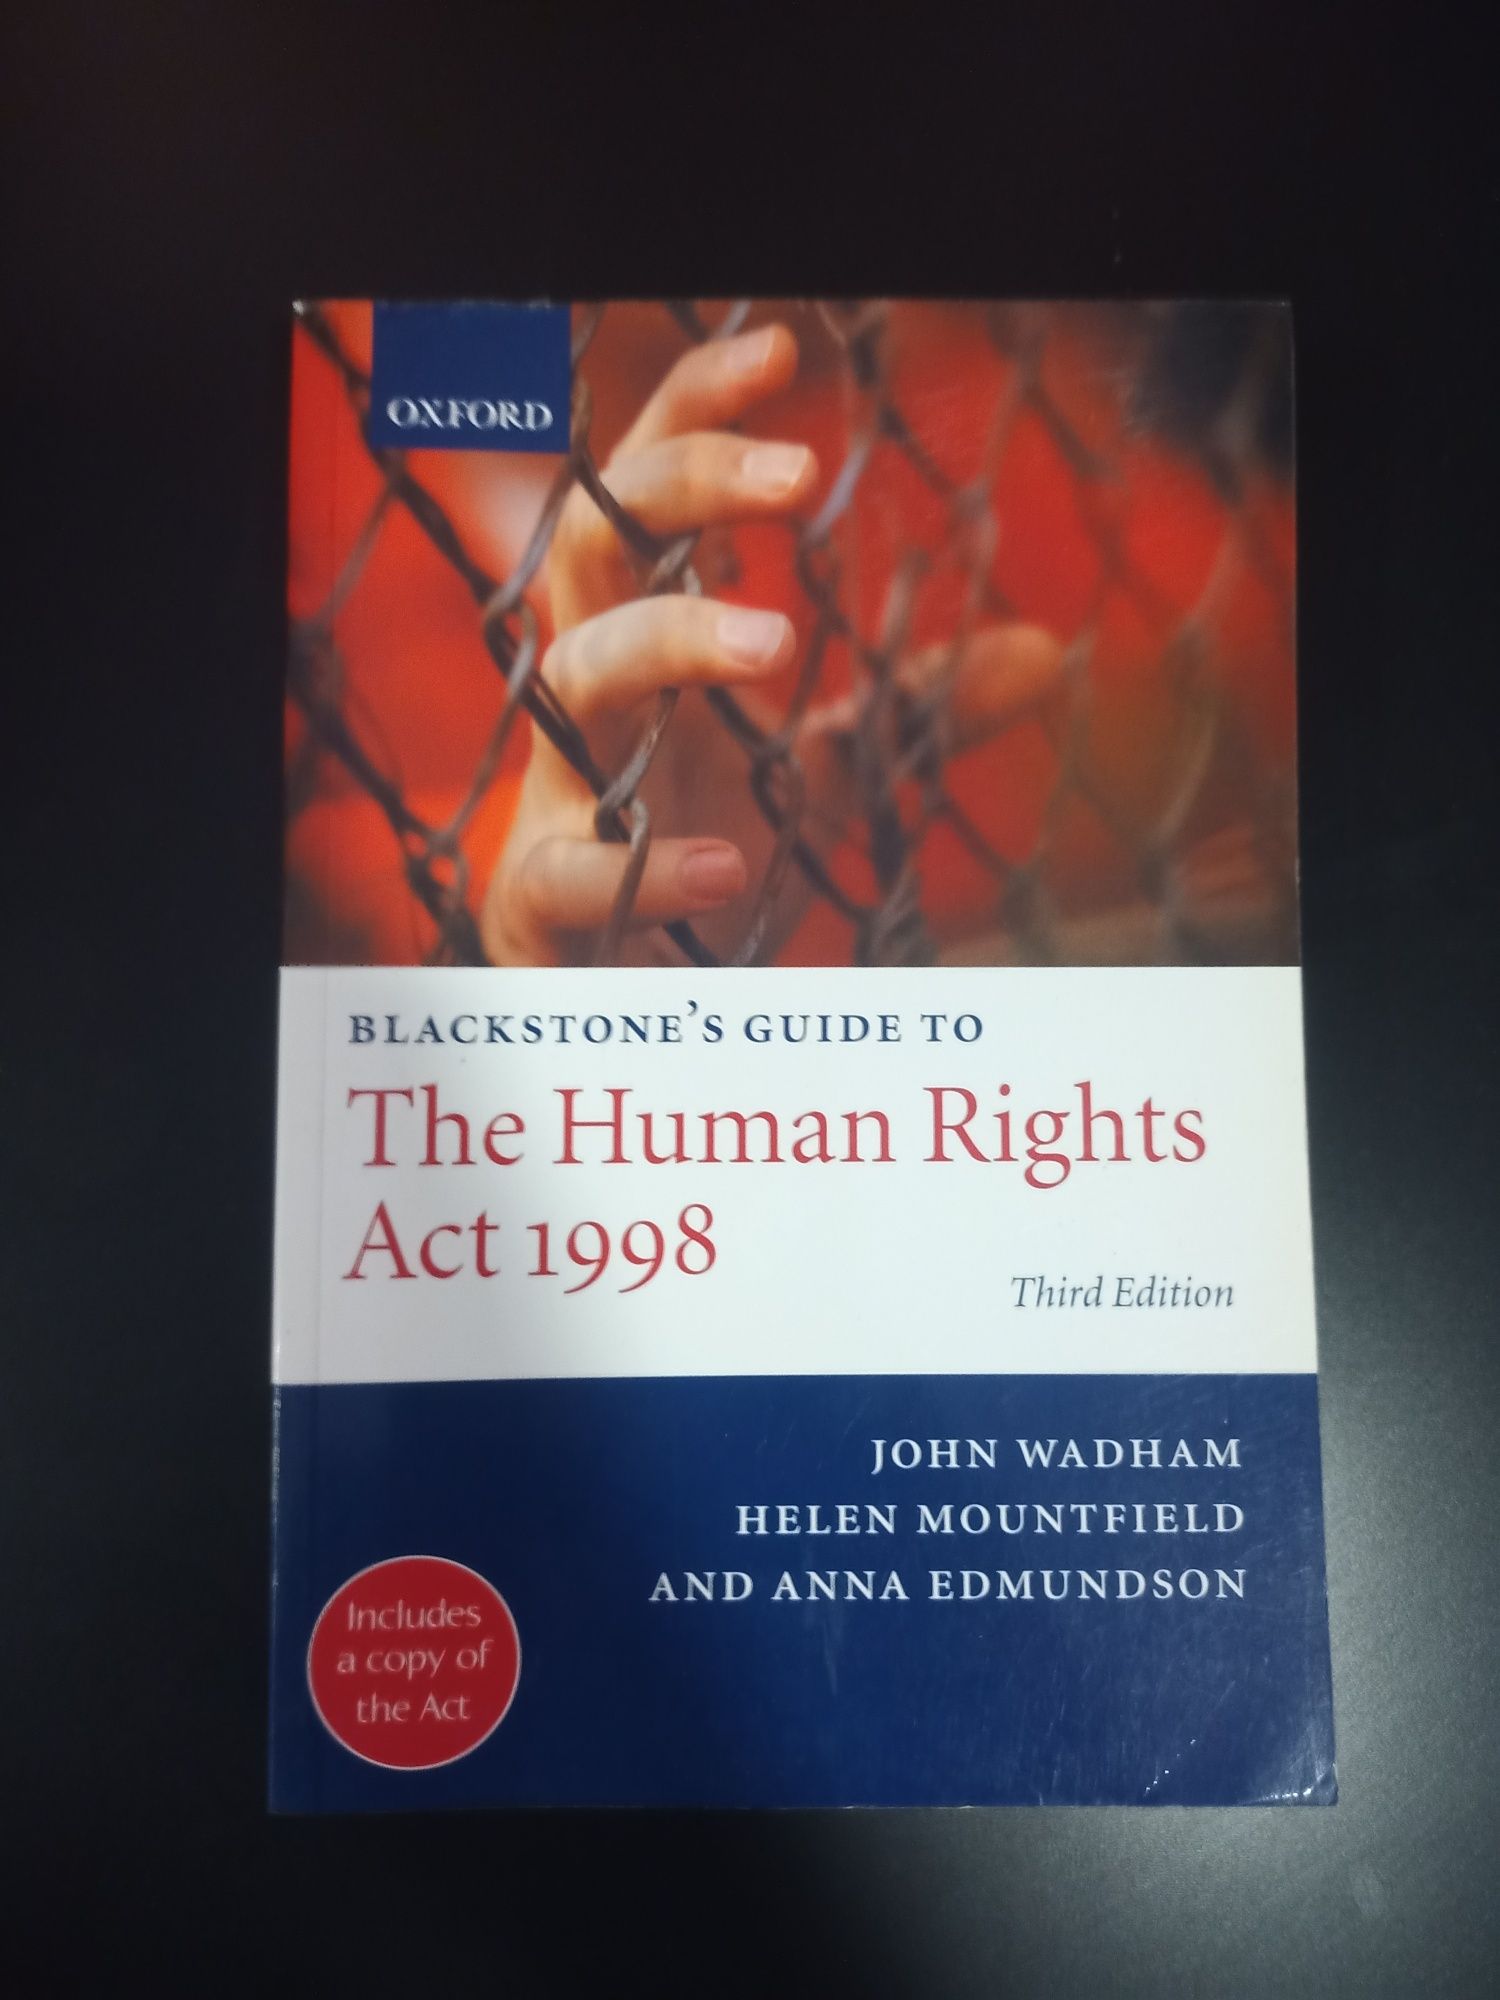 The Human Rights Act 1999